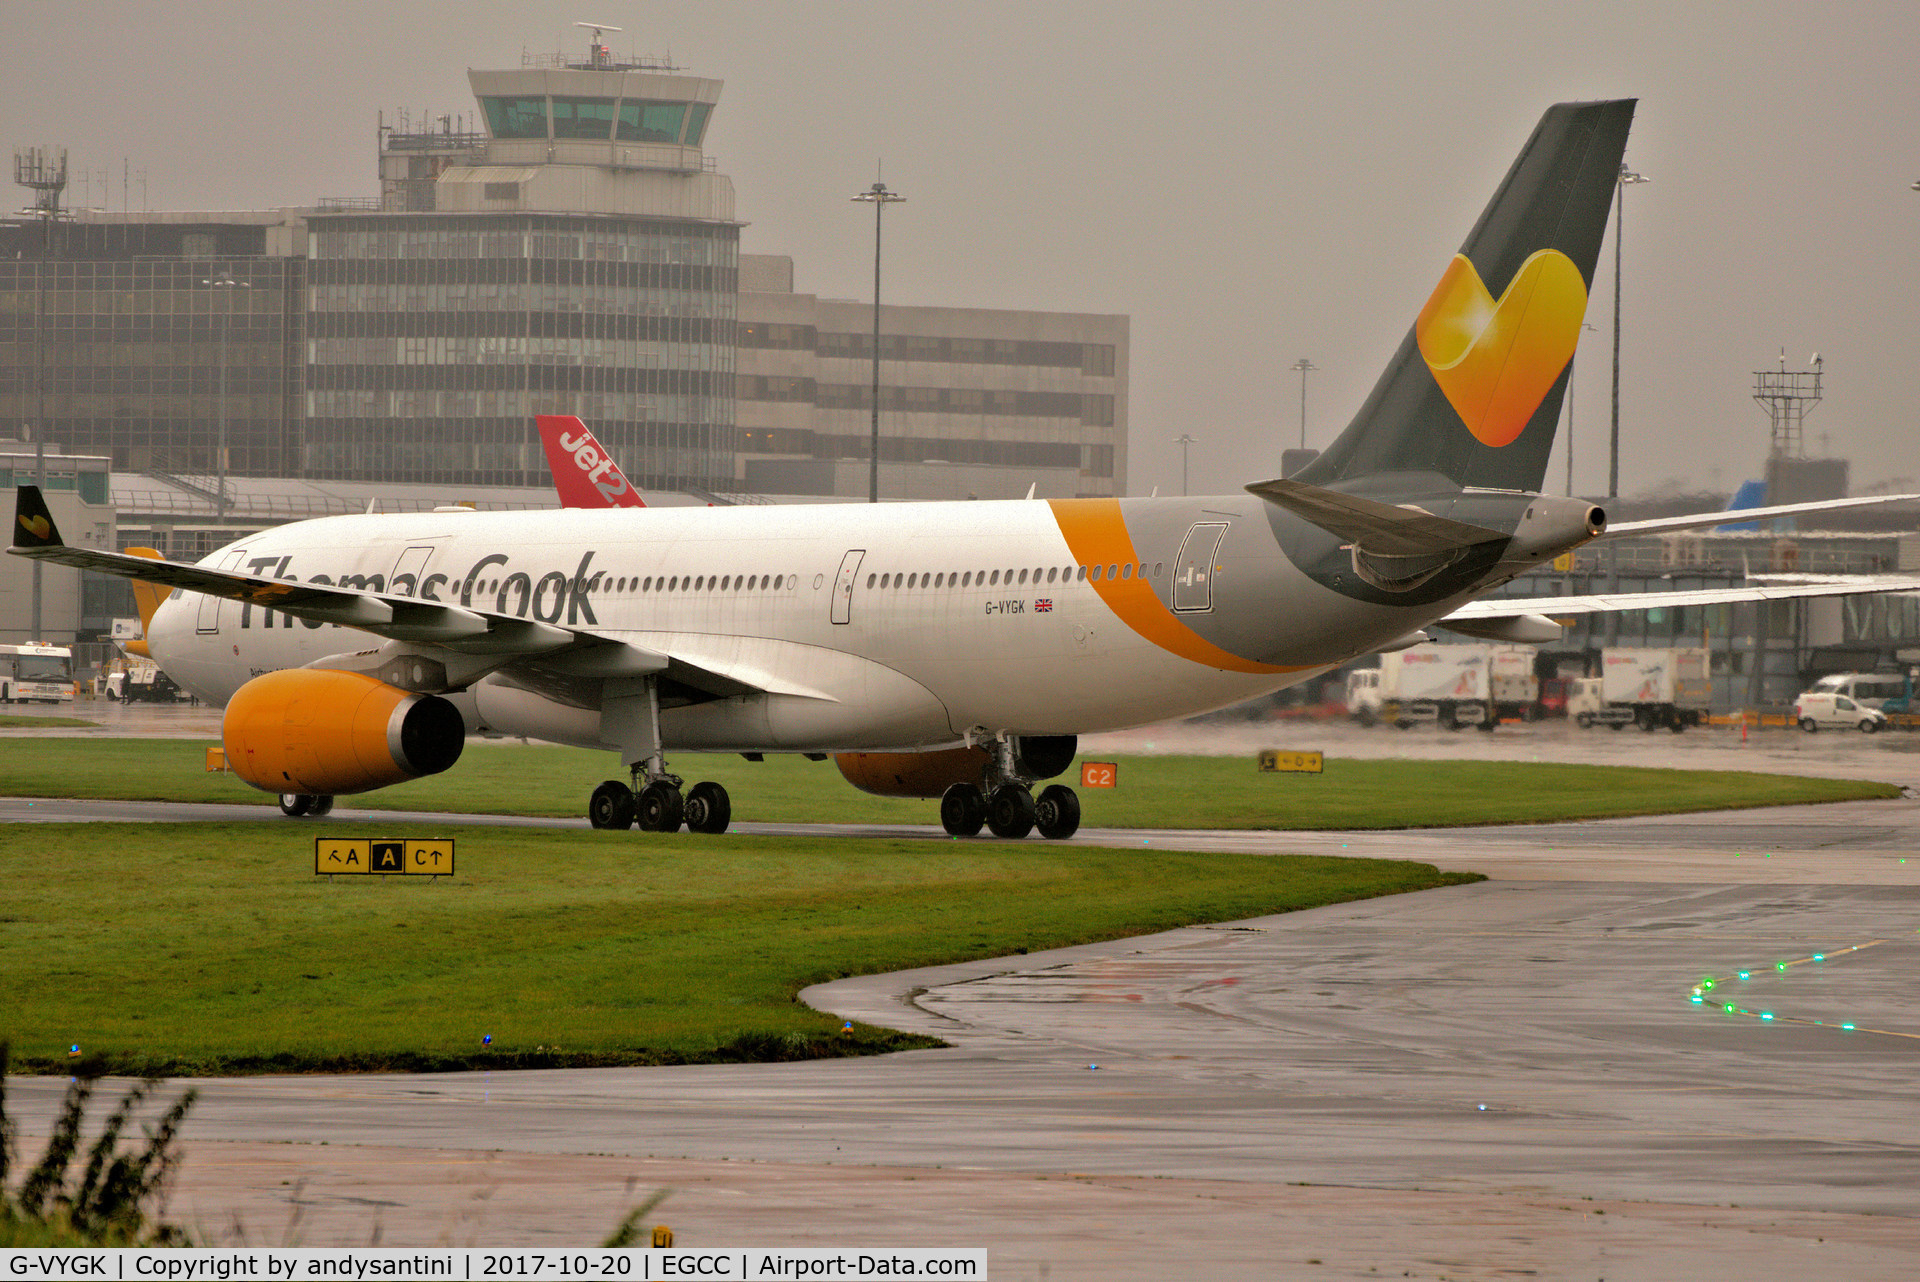 G-VYGK, 2014 Airbus A330-243 C/N 1498, taxing round to its gate/stand